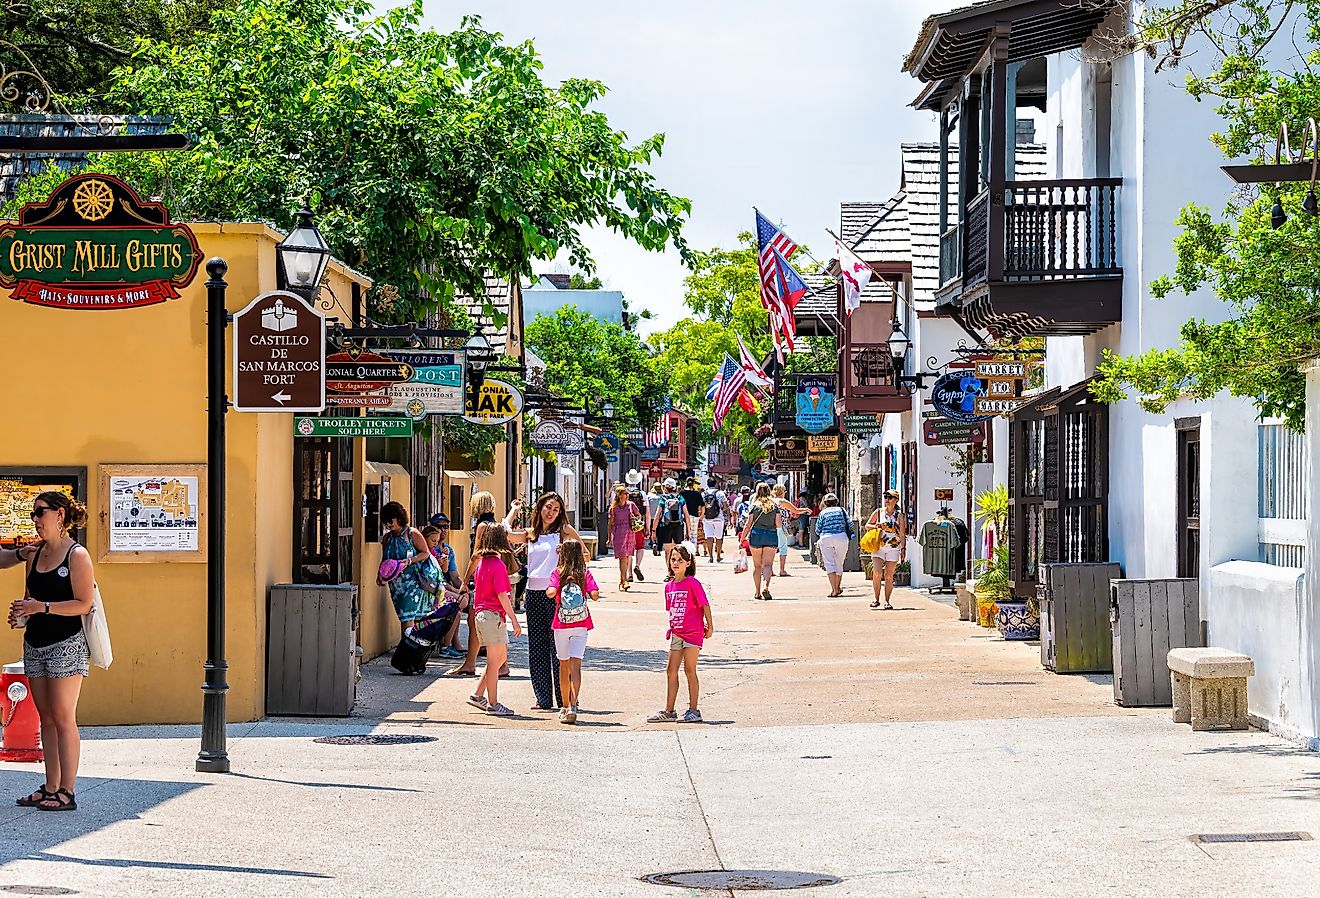 People walking and shopping at Florida city St George Street in St. Augustine, Florida. Image credit Andriy Blokhin via Shutterstock